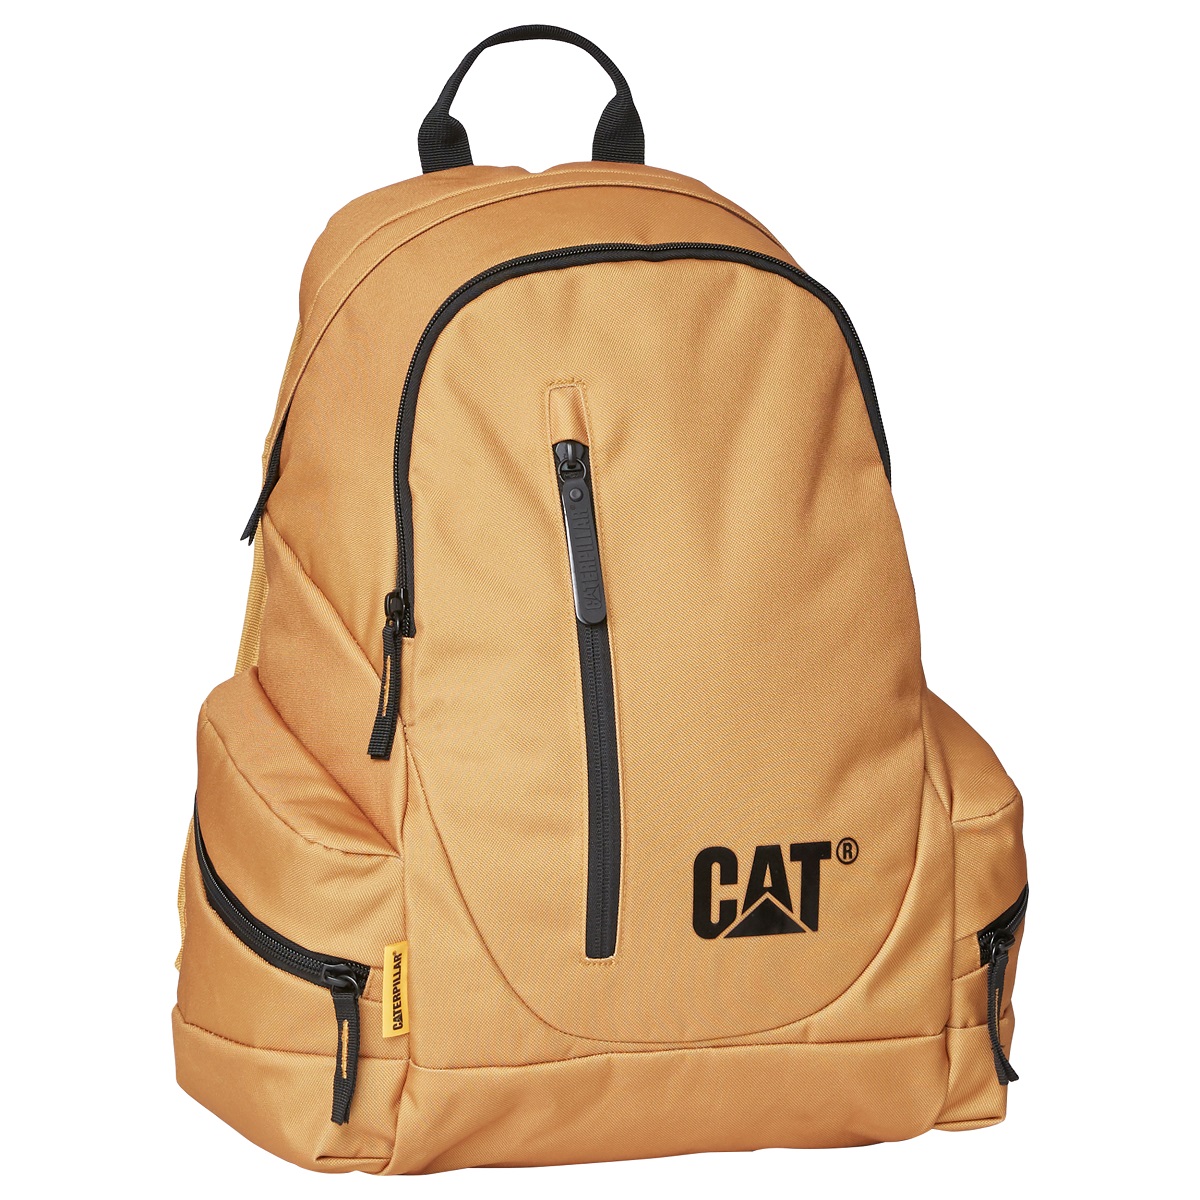 CAT -  The Project Backpack - Machine Yellow (83541-503)